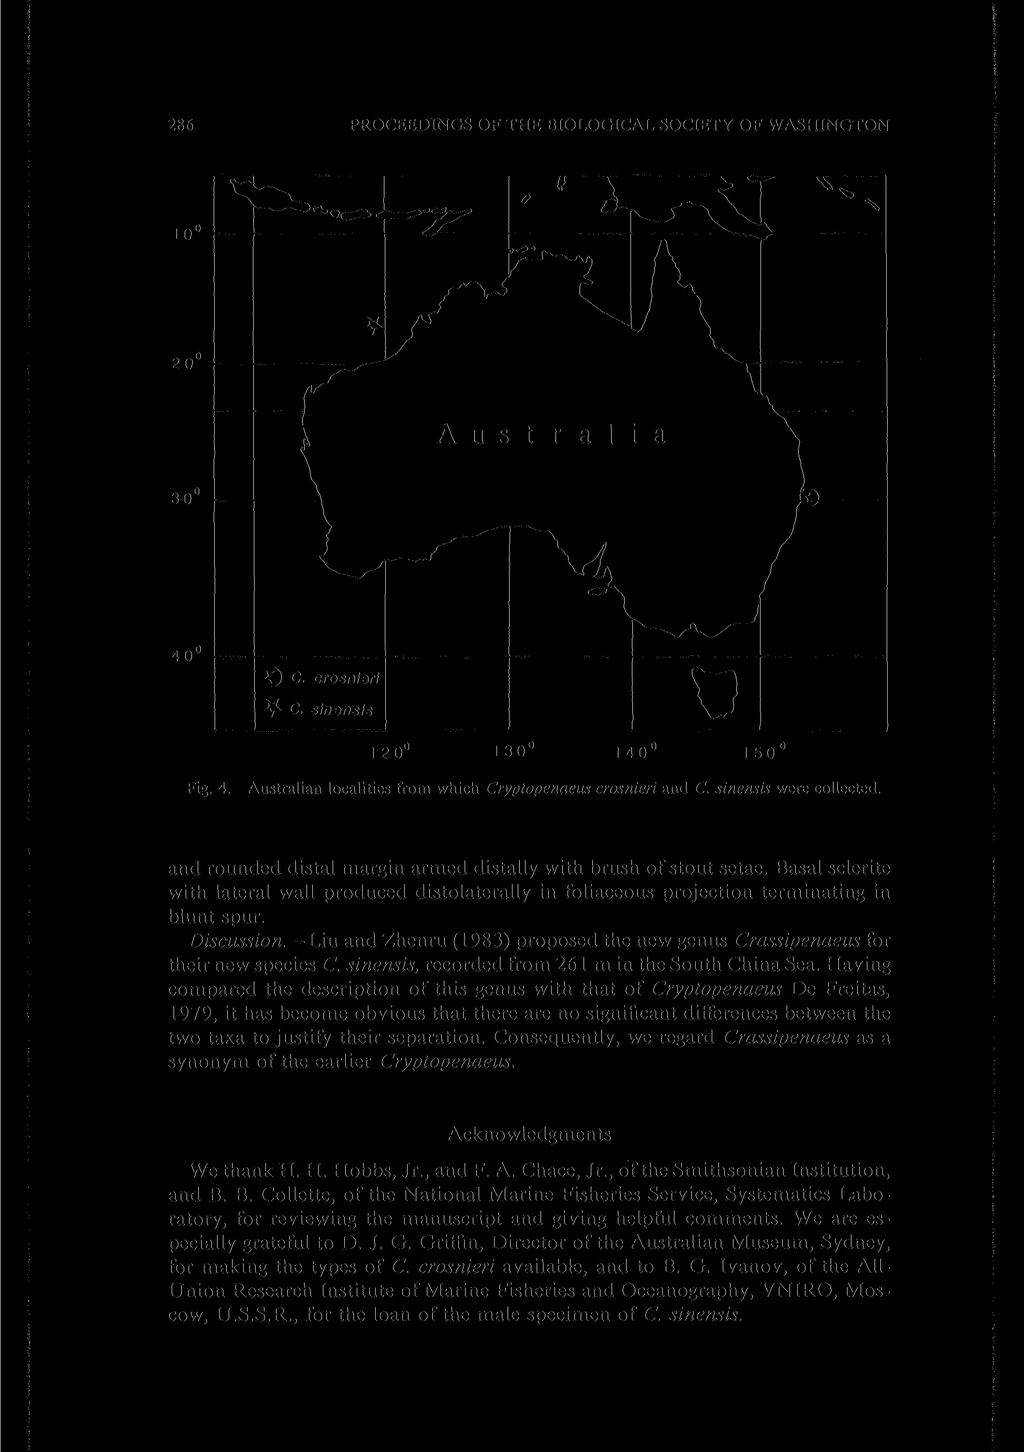 286 PROCEEDINGS OF THE BIOLOGICAL SOCIETY OF WASHINGTON Fig. 4. Australian localities from which Cryptopenaeus crosnieri and C. sinensis were collected.